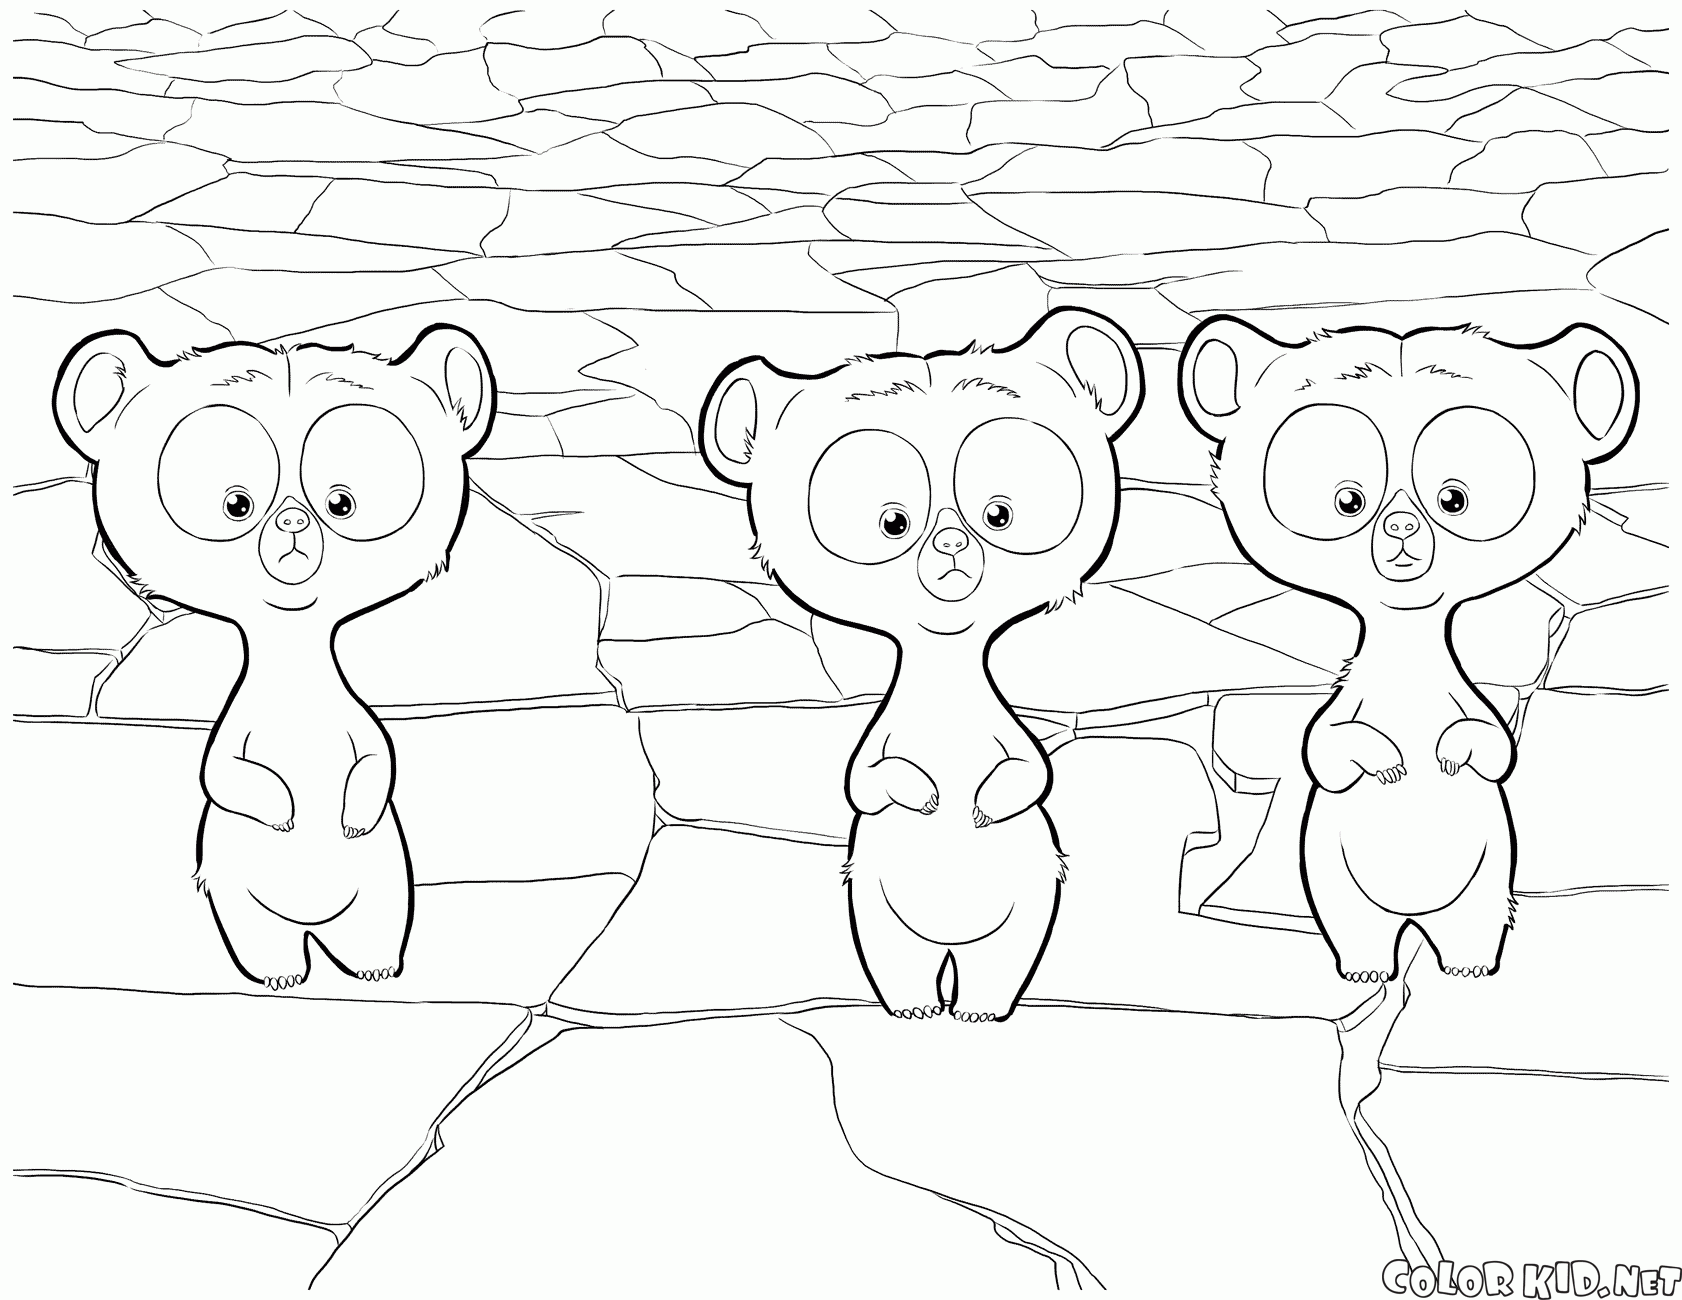 The triplets have become bear cubs